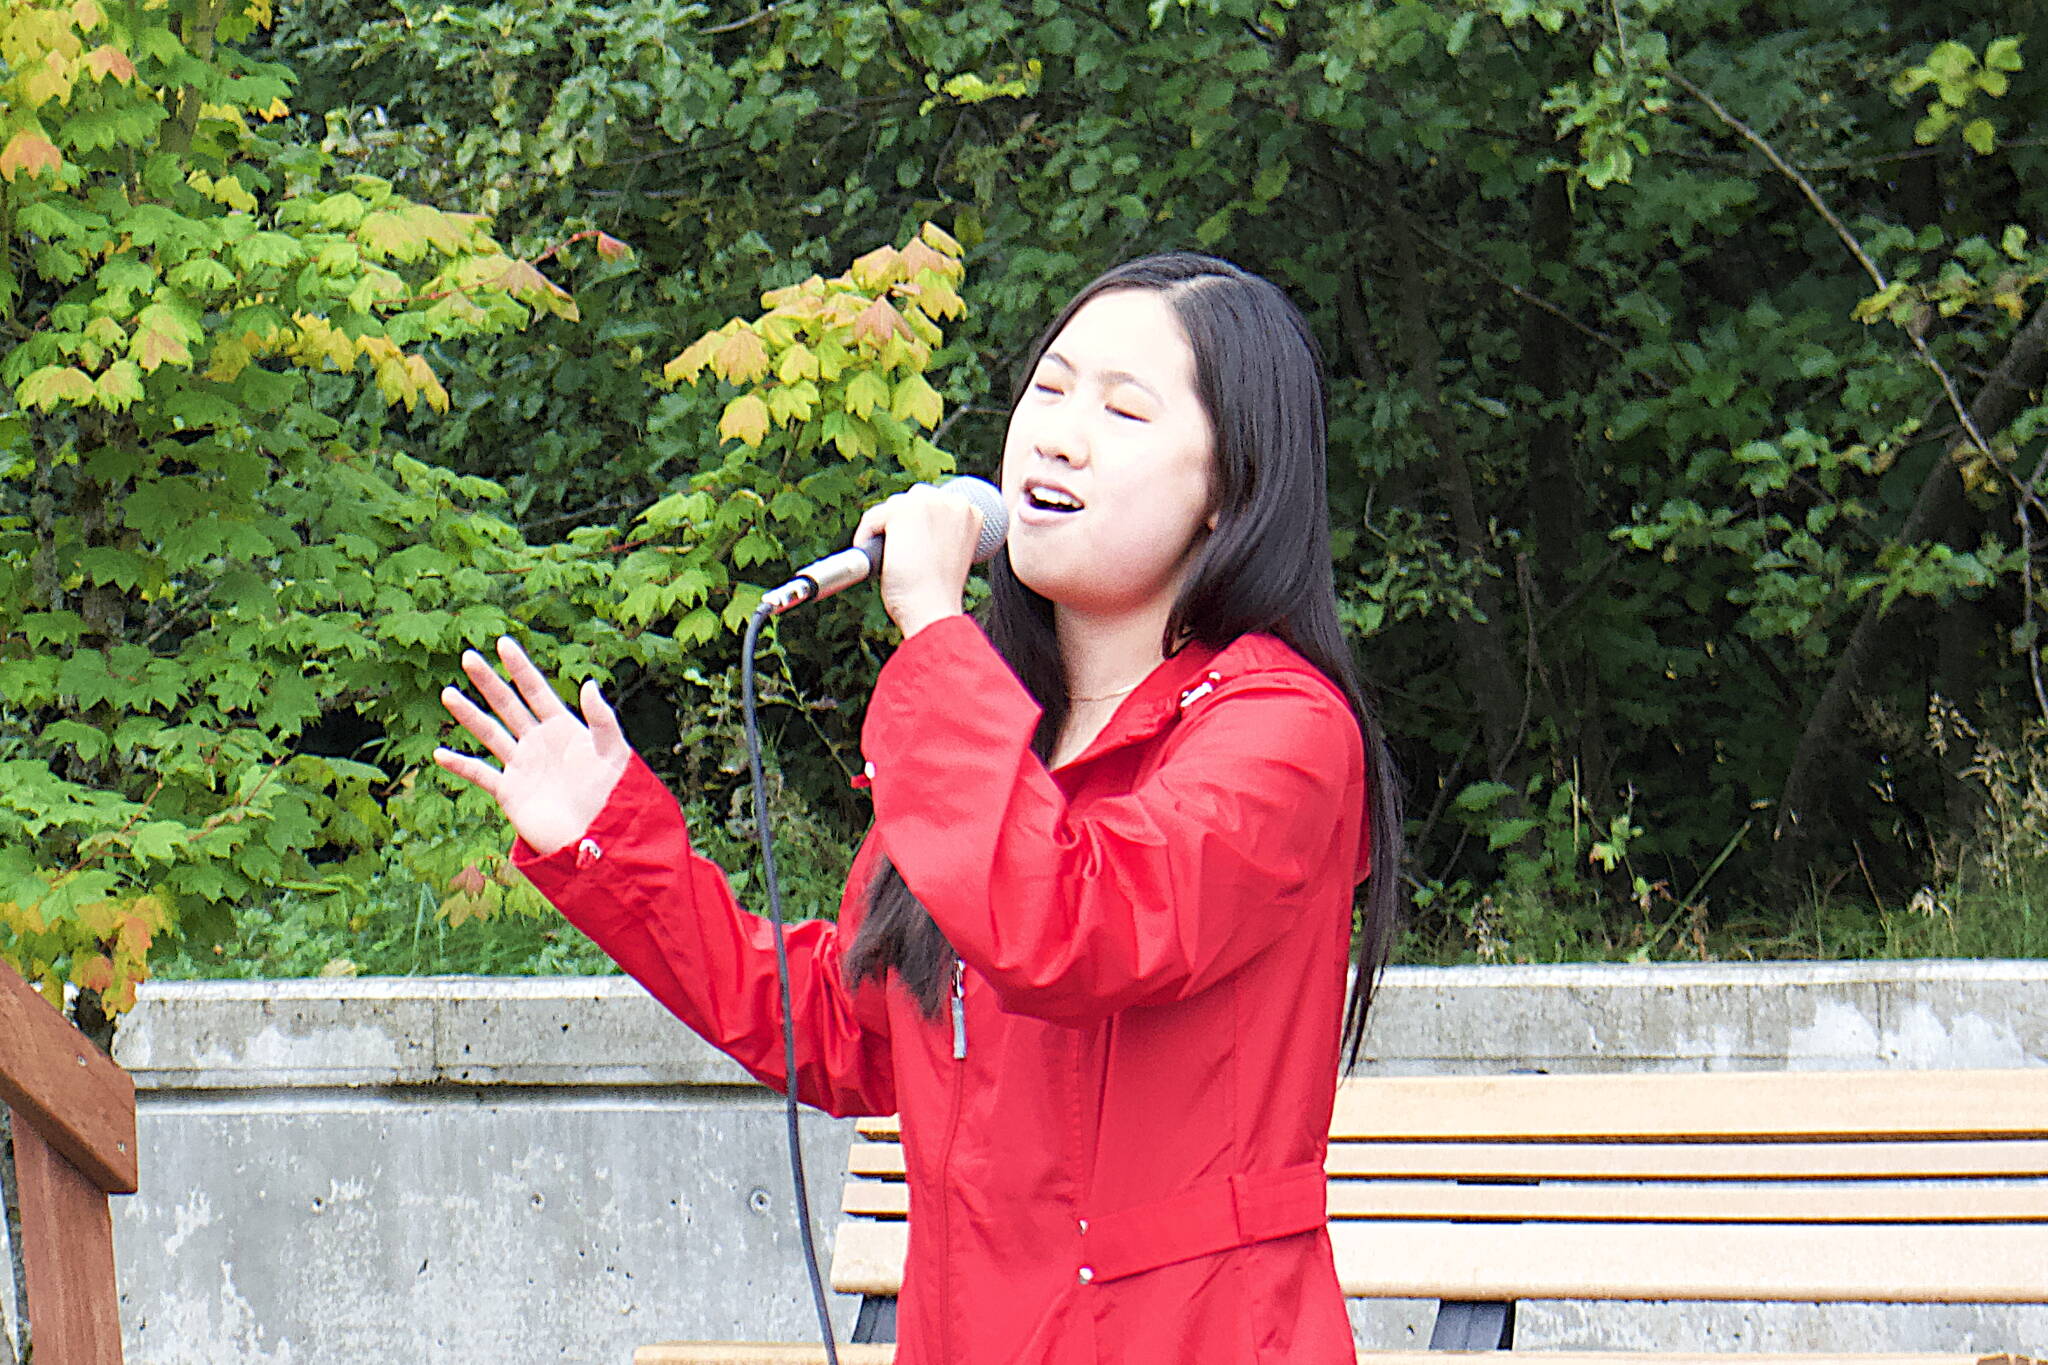 Elizabeth Djajalie sings the national anthem during a ceremony Monday at the September 11th Memorial at Riverside Rotary Park commemorating the terrorist attacks on that date in 2001. (Mark Sabbatini / Juneau Empire)